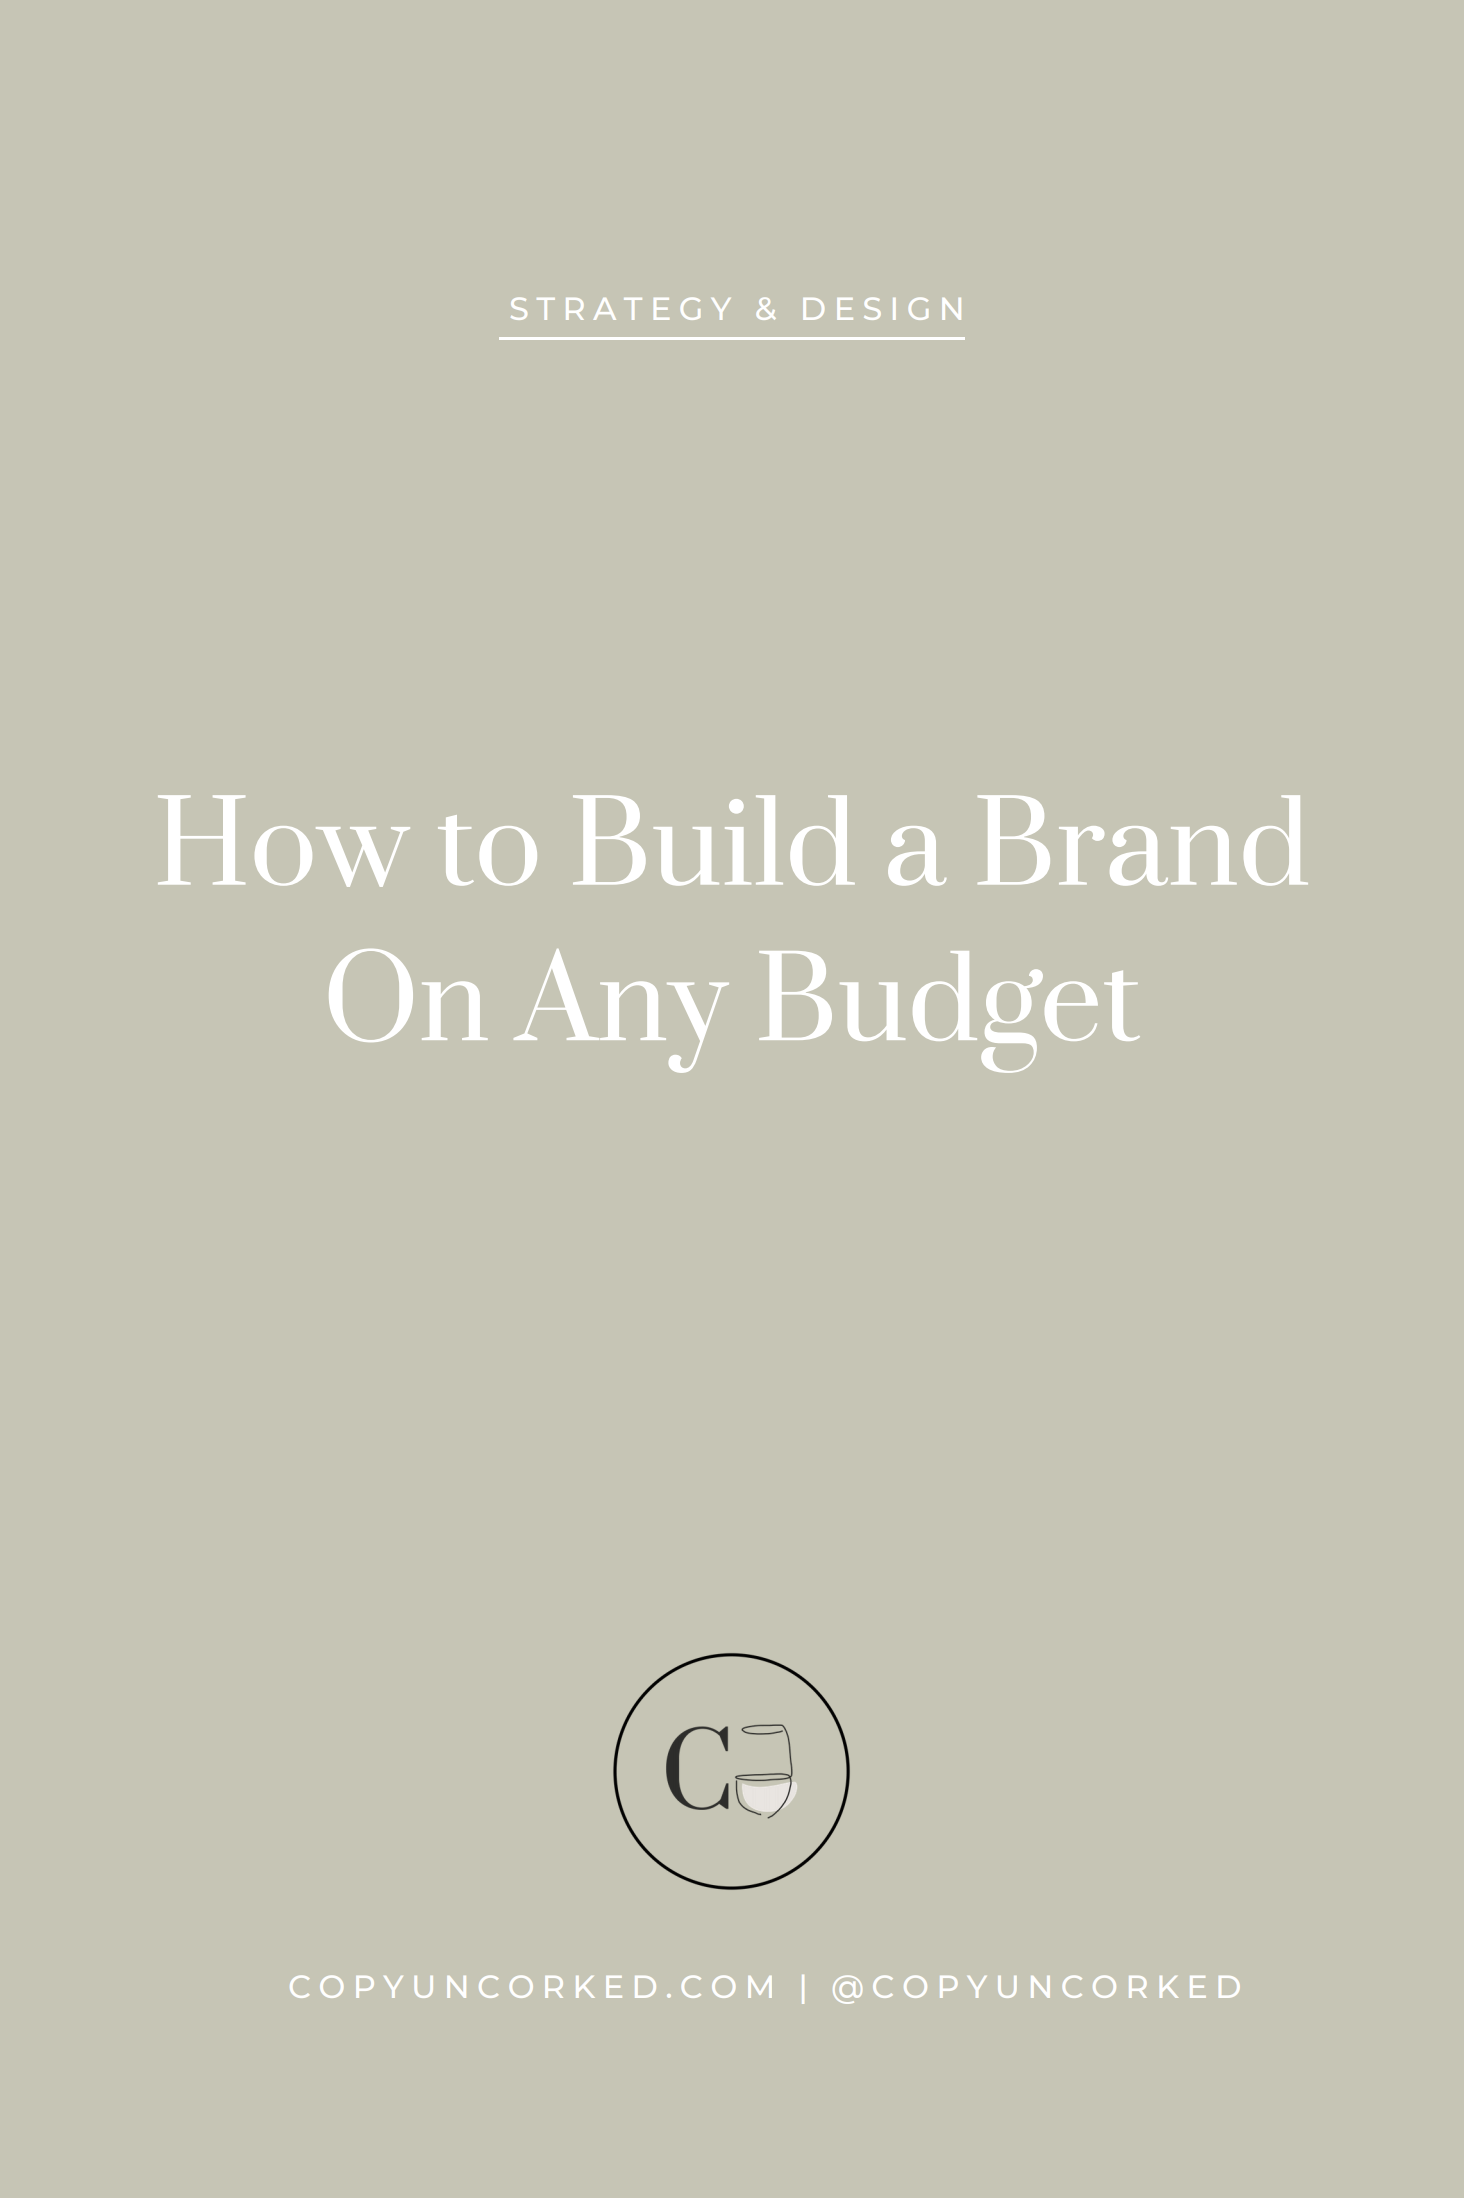 How to Build a Brand on Any Budget - copyuncorked.com